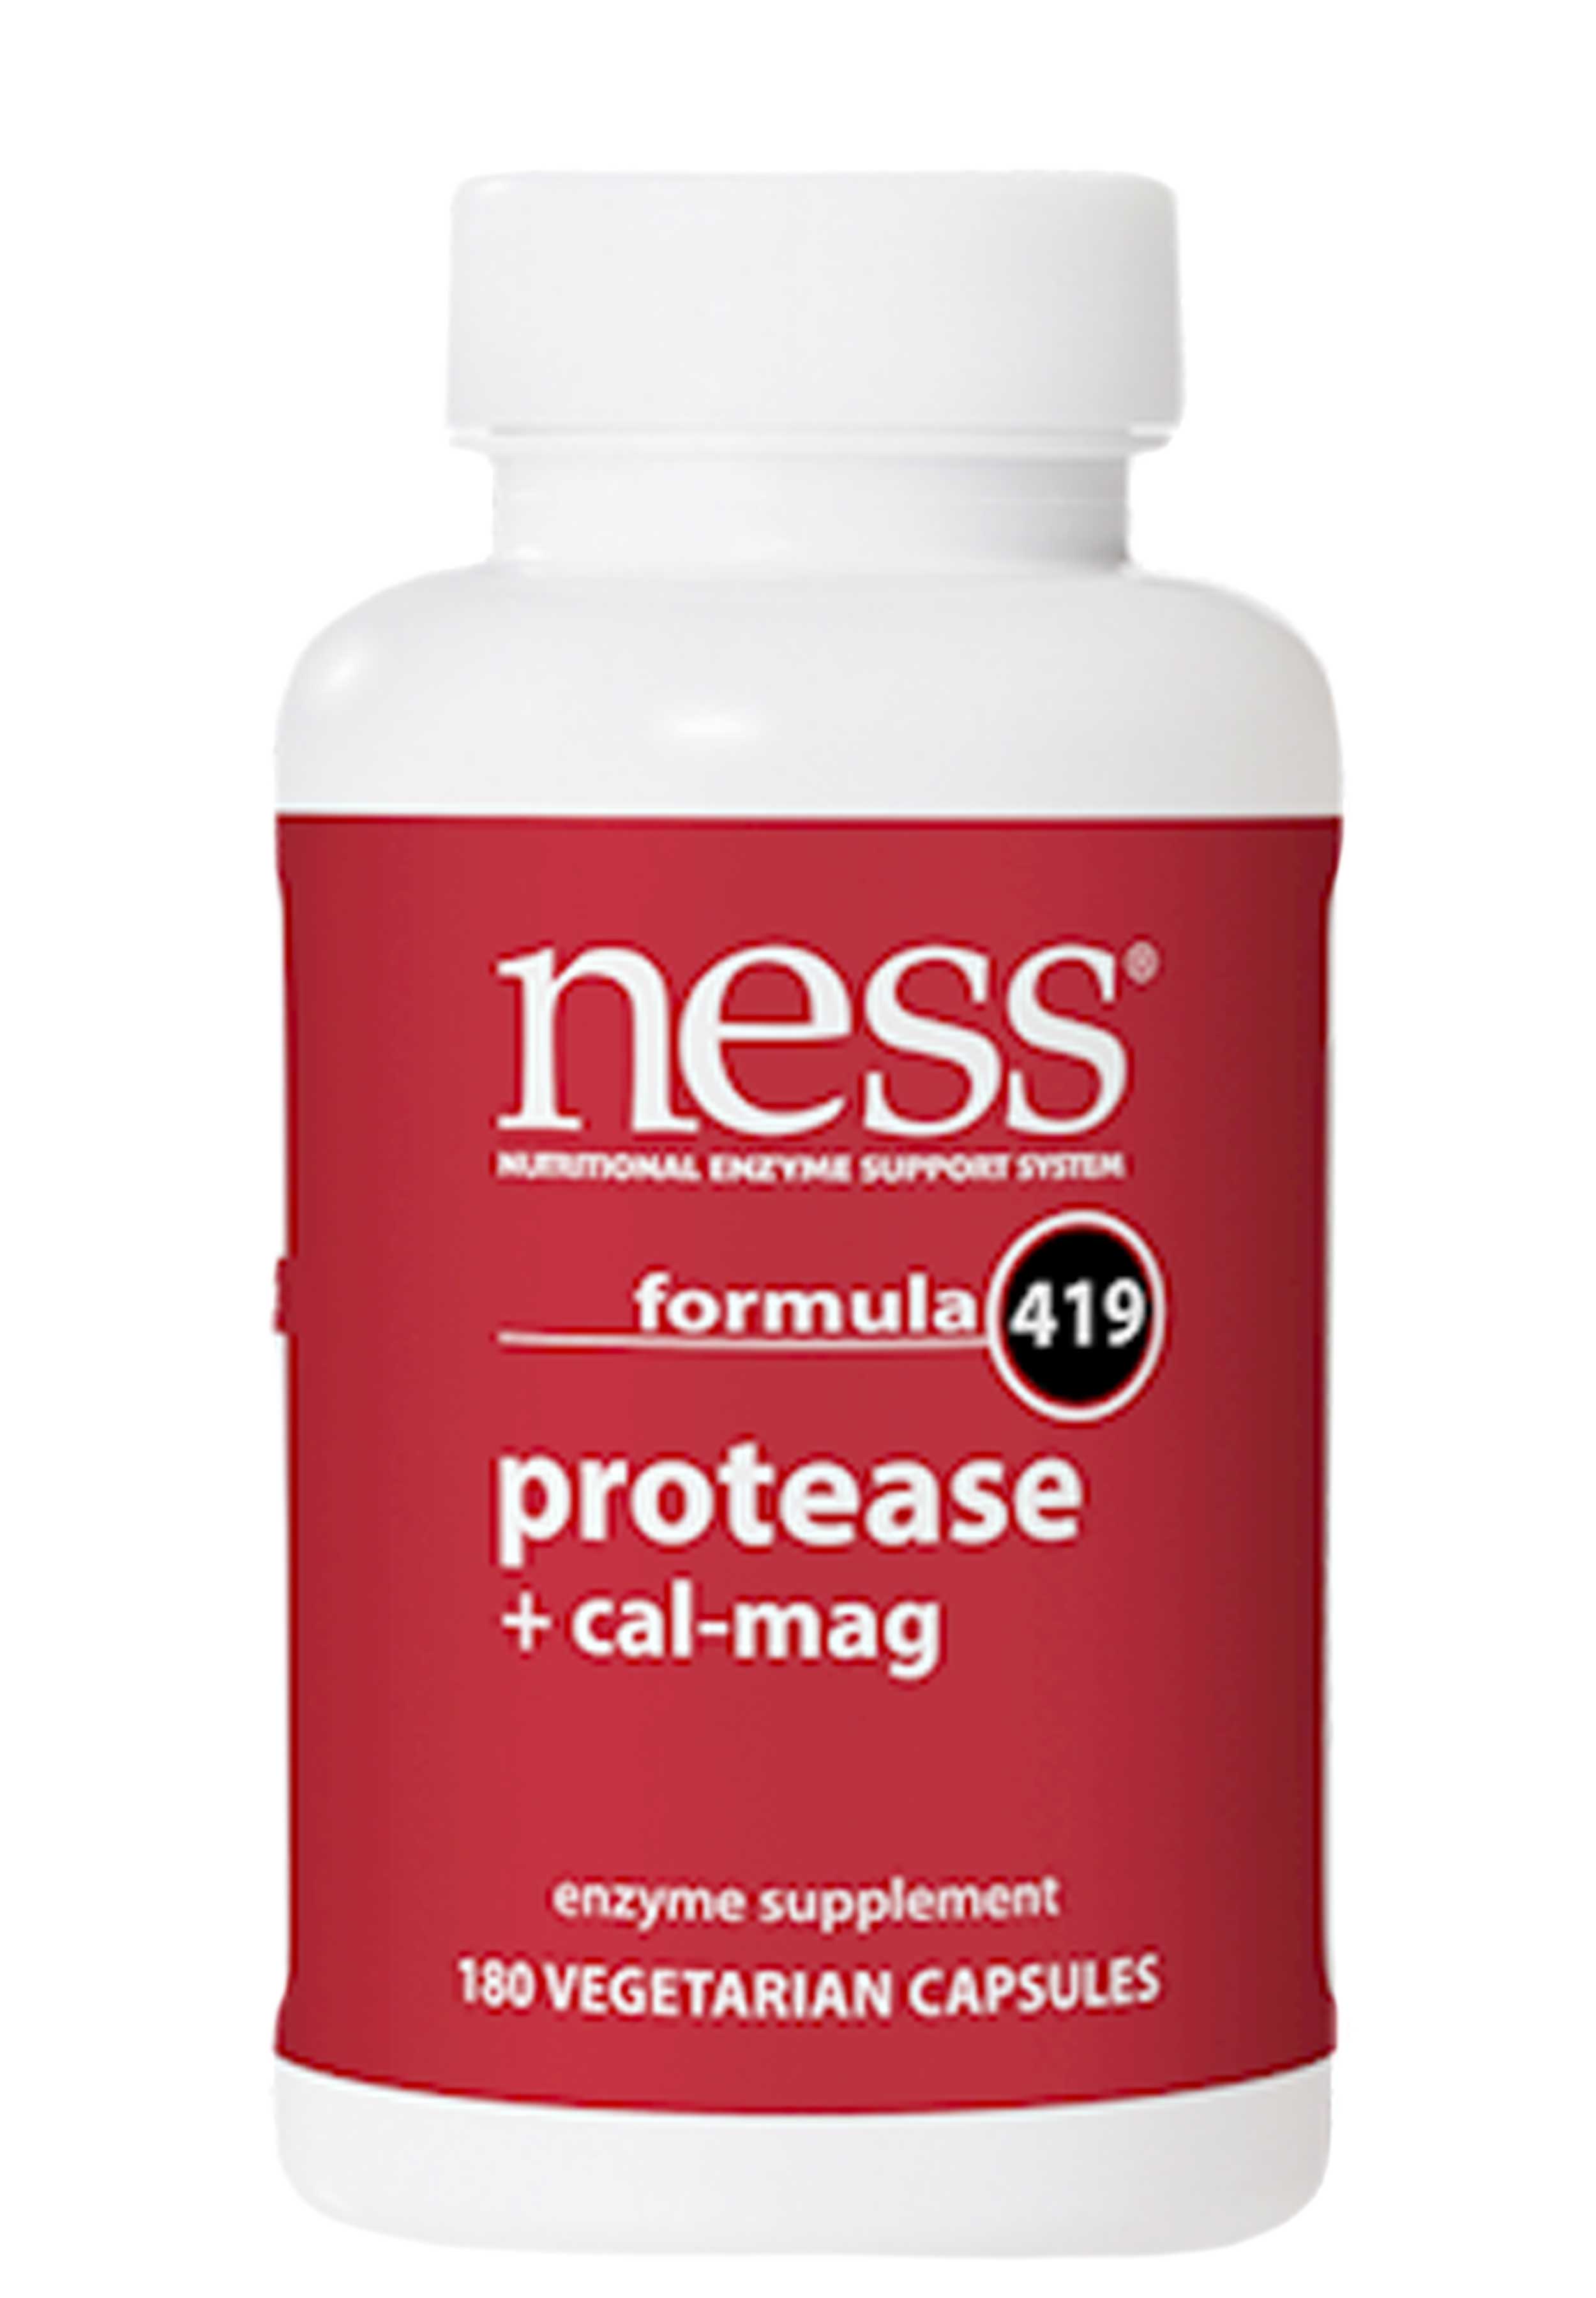 Ness Enzymes Protease + Cal-Mag formula 419